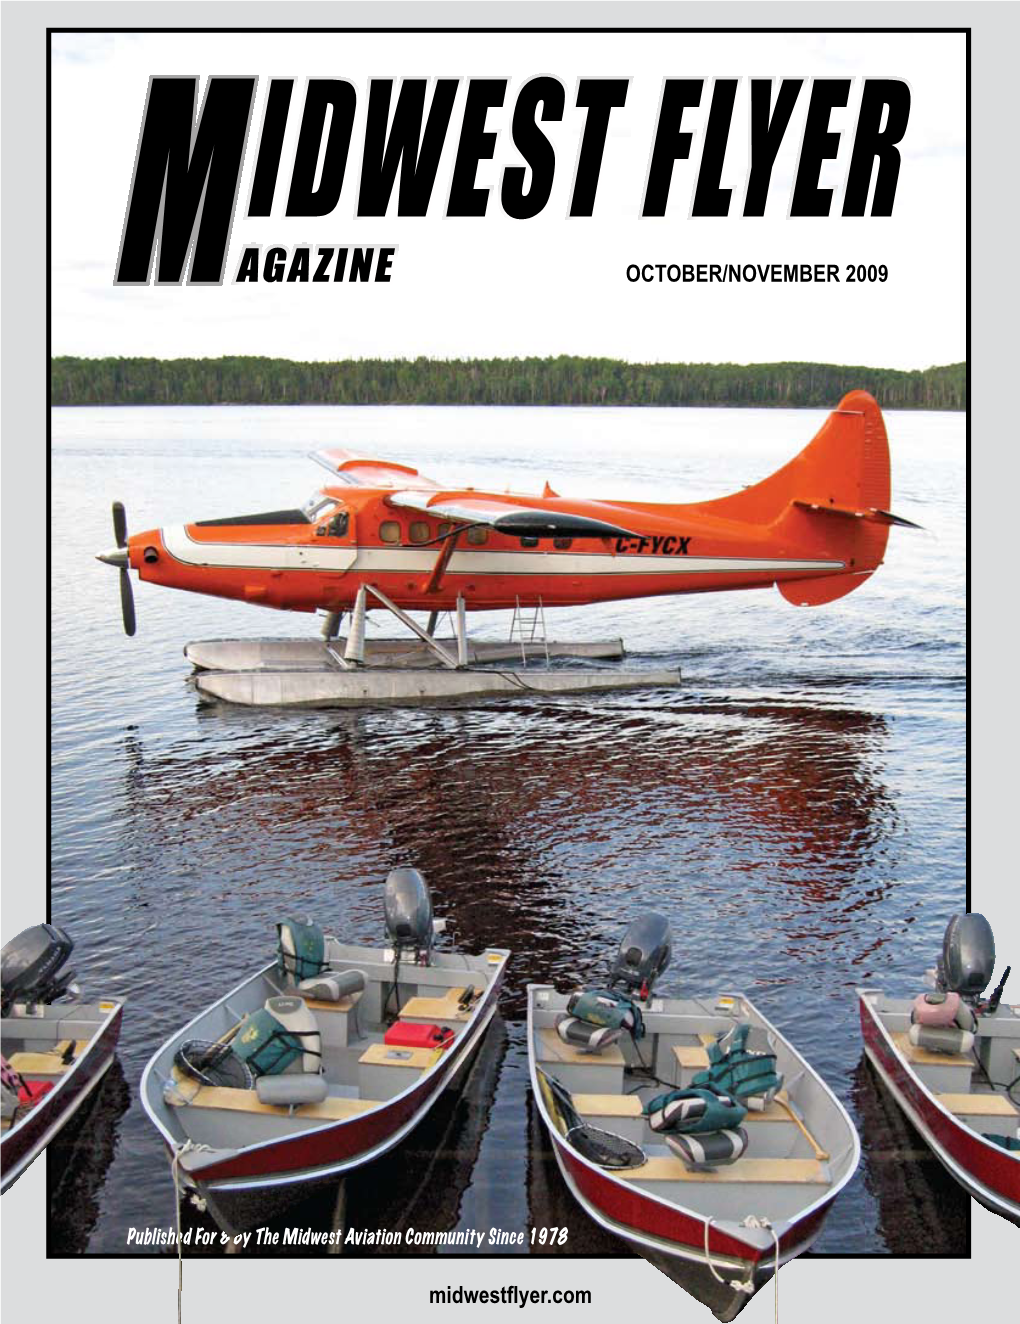 MIDWEST FLYER MAGAZINE Aircraft Display Area, Which Was Wide Enough to Handle the Aircraft’S Massive Landing Gear